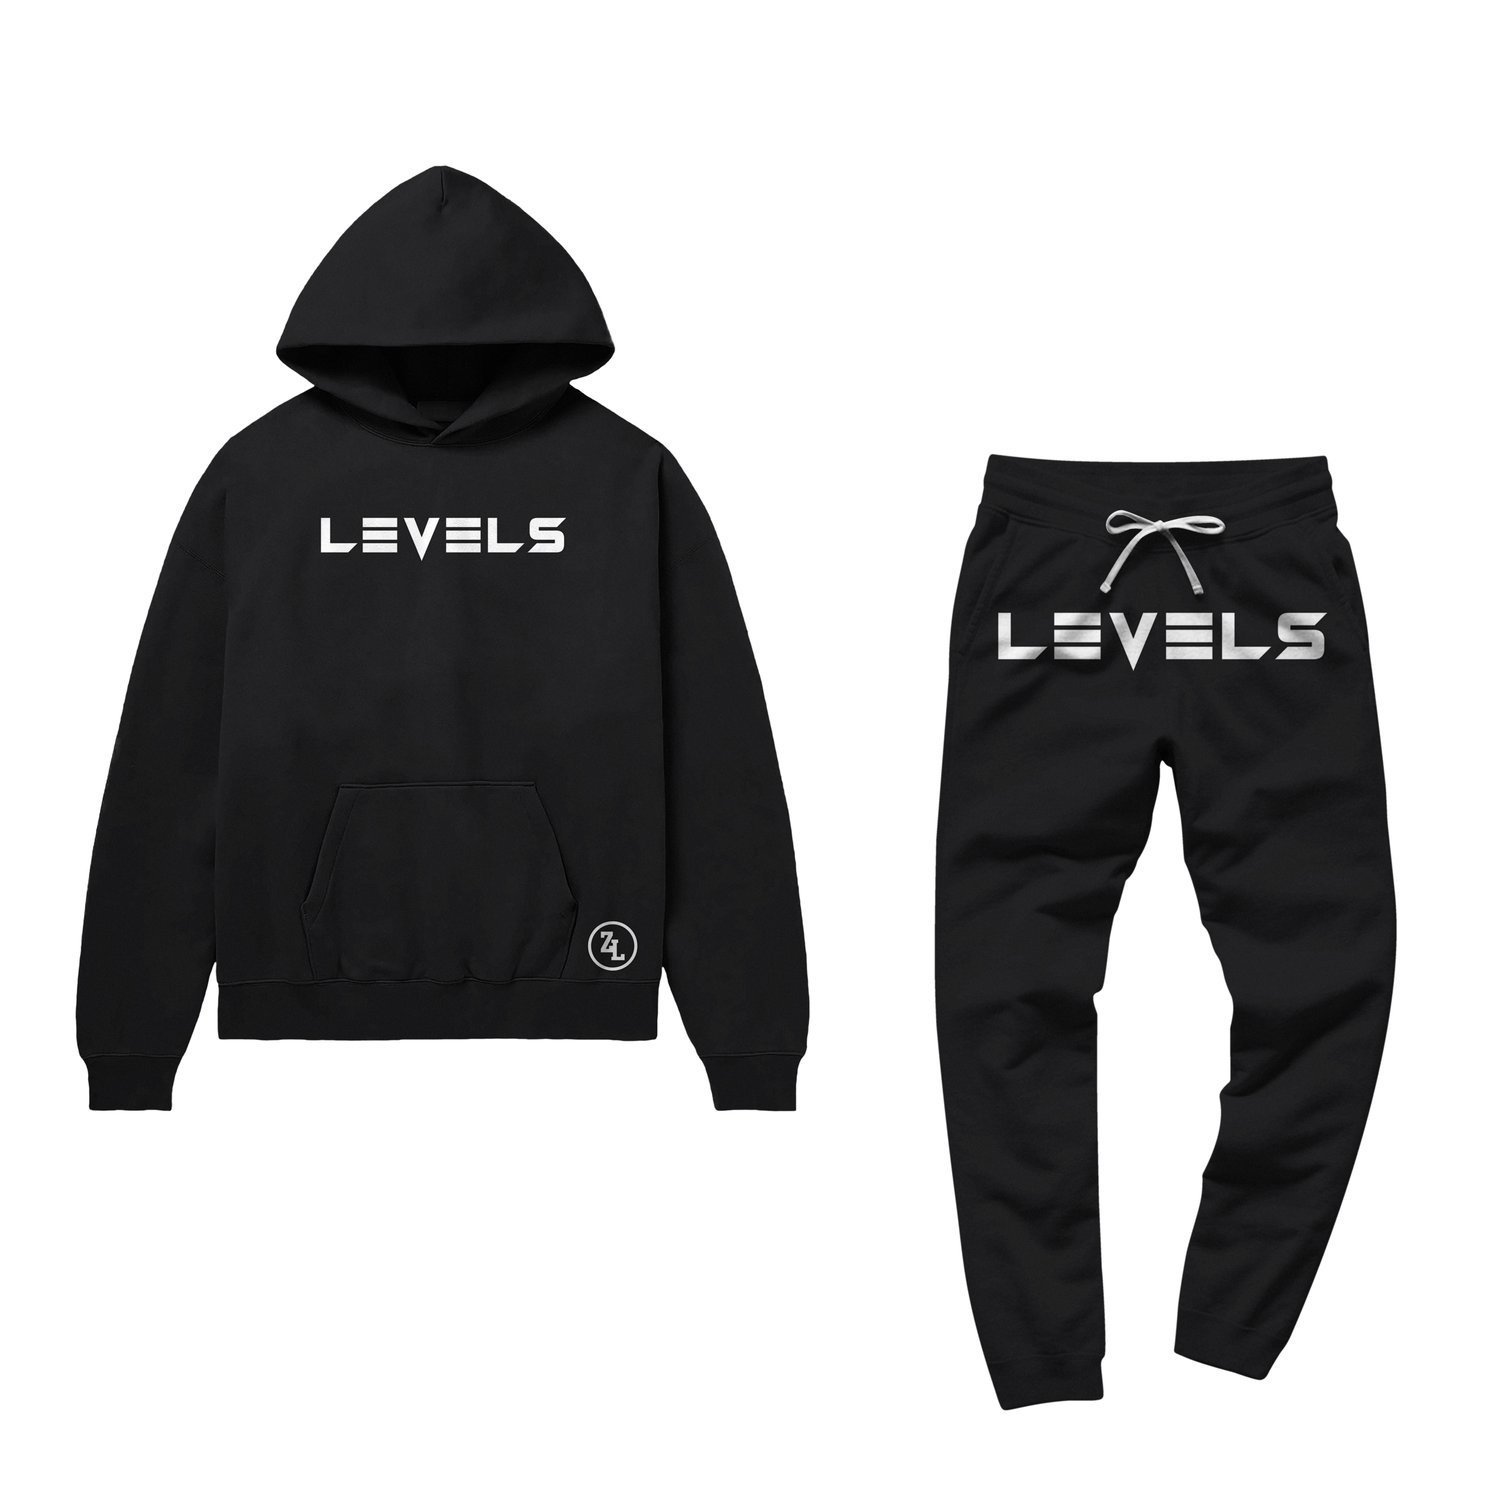 Image of The Cool Fits - "Levels" (click for more colors)